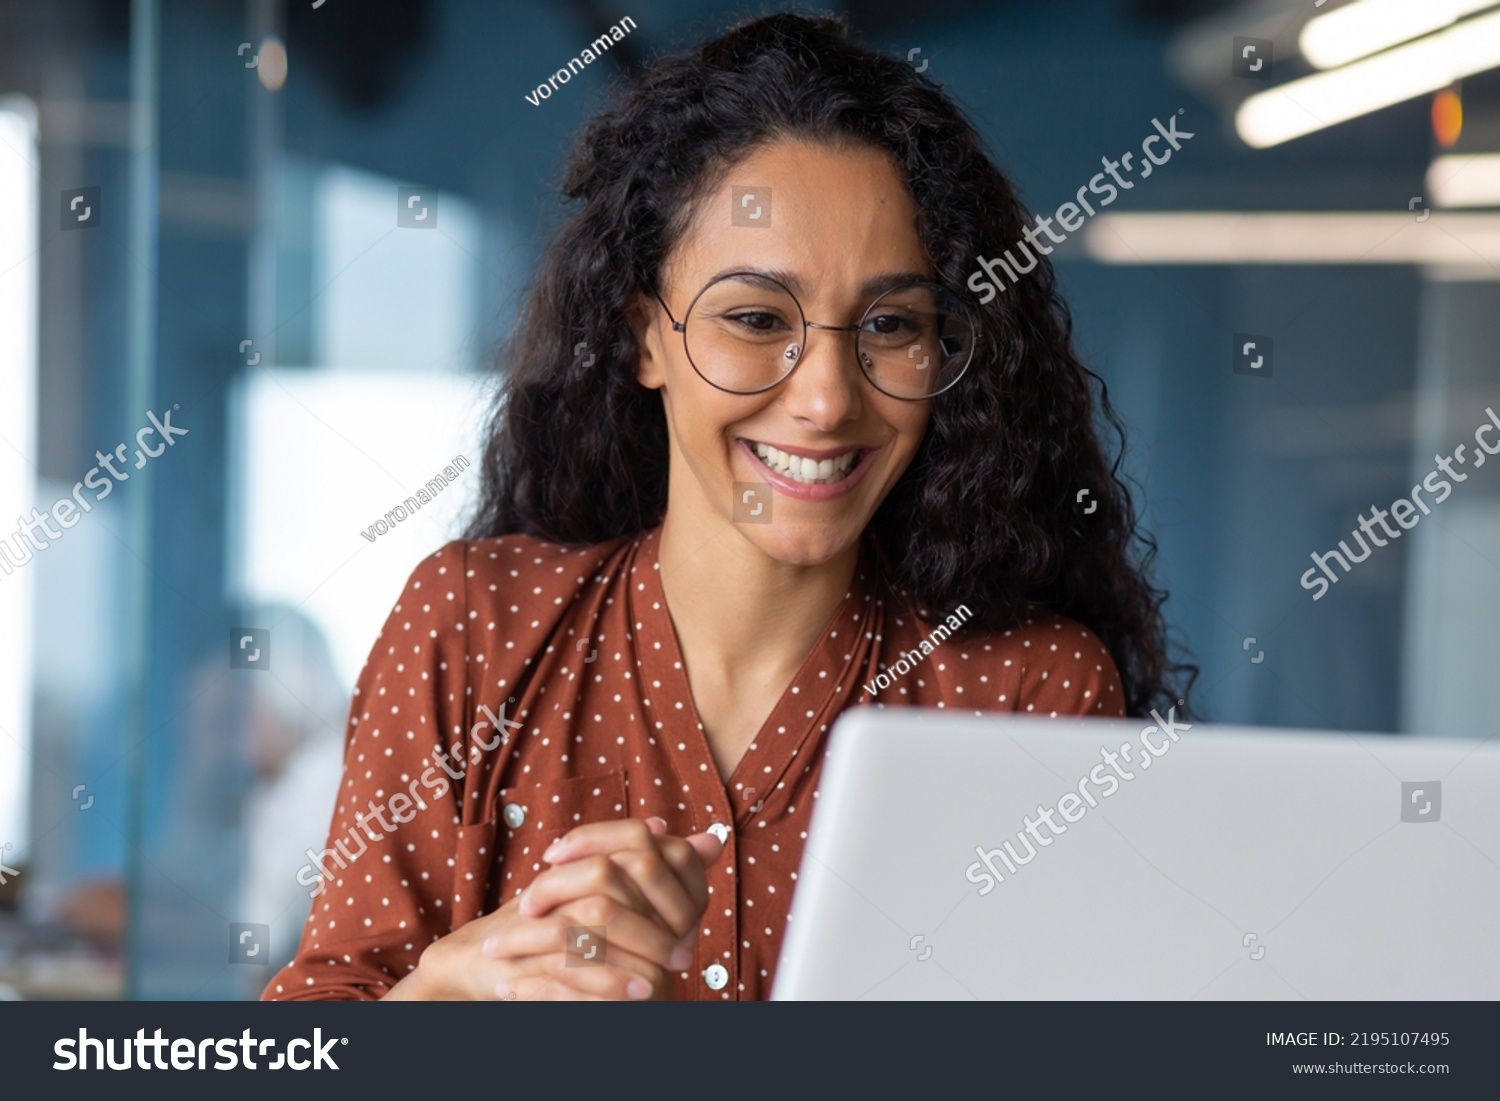 Close-up photo of young beautiful business woman with curly hair and glasses Hispanic woman talking on video call using laptop for remote communication and conference #2195107495